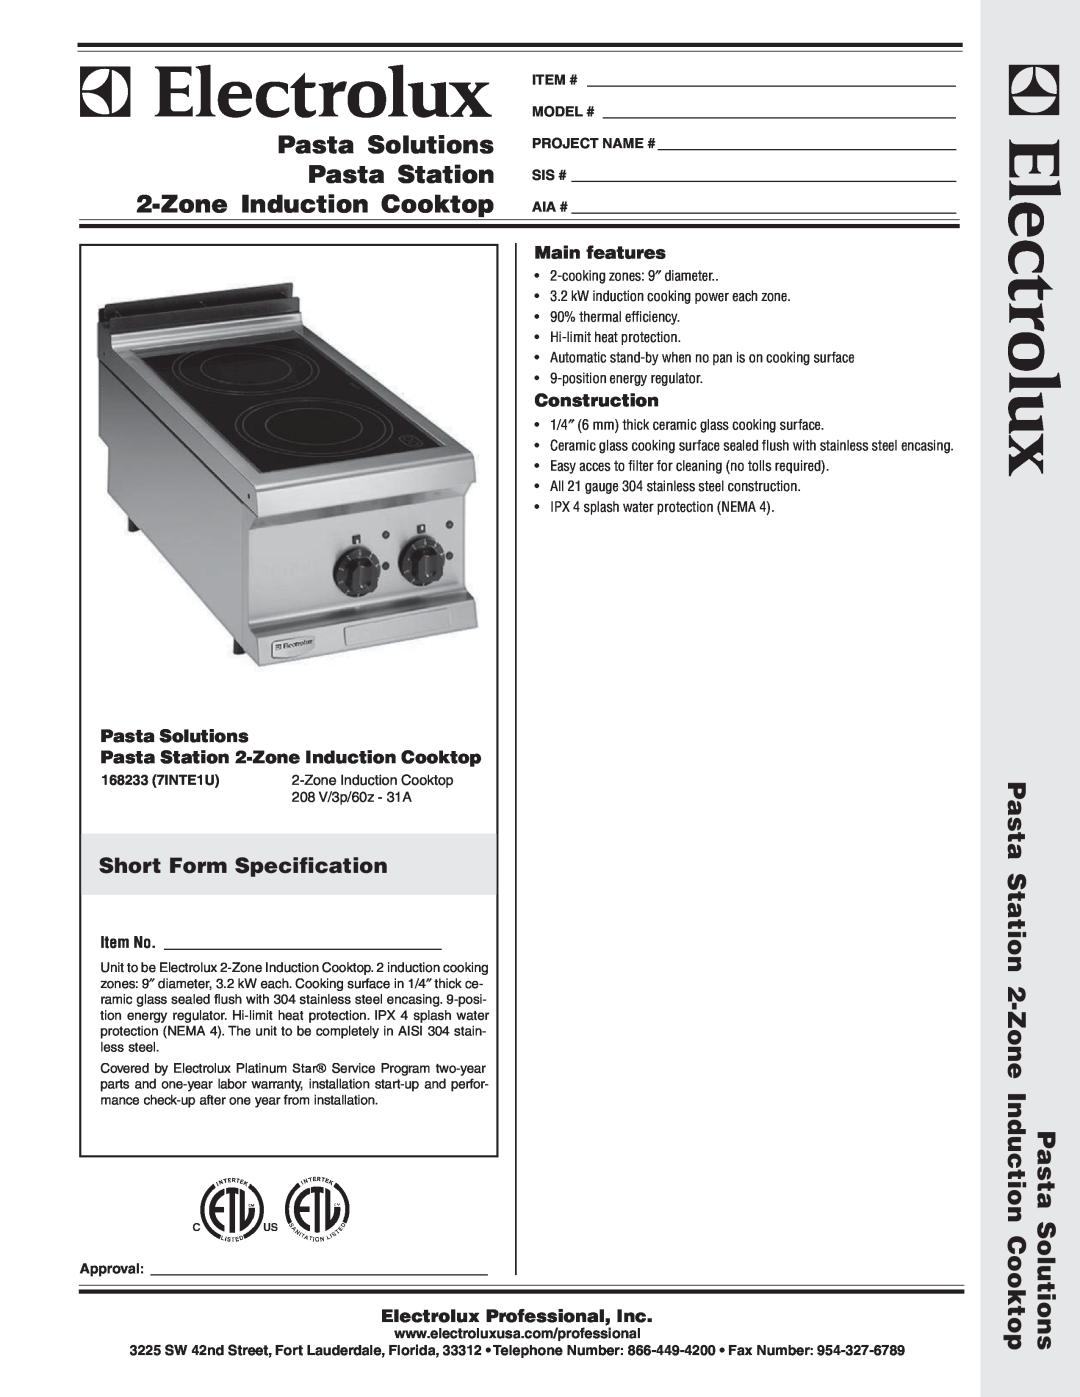 Electrolux 7INTE1U warranty Short Form Specification, Solutions Cooktop, Main features, Construction, Pasta Solutions 